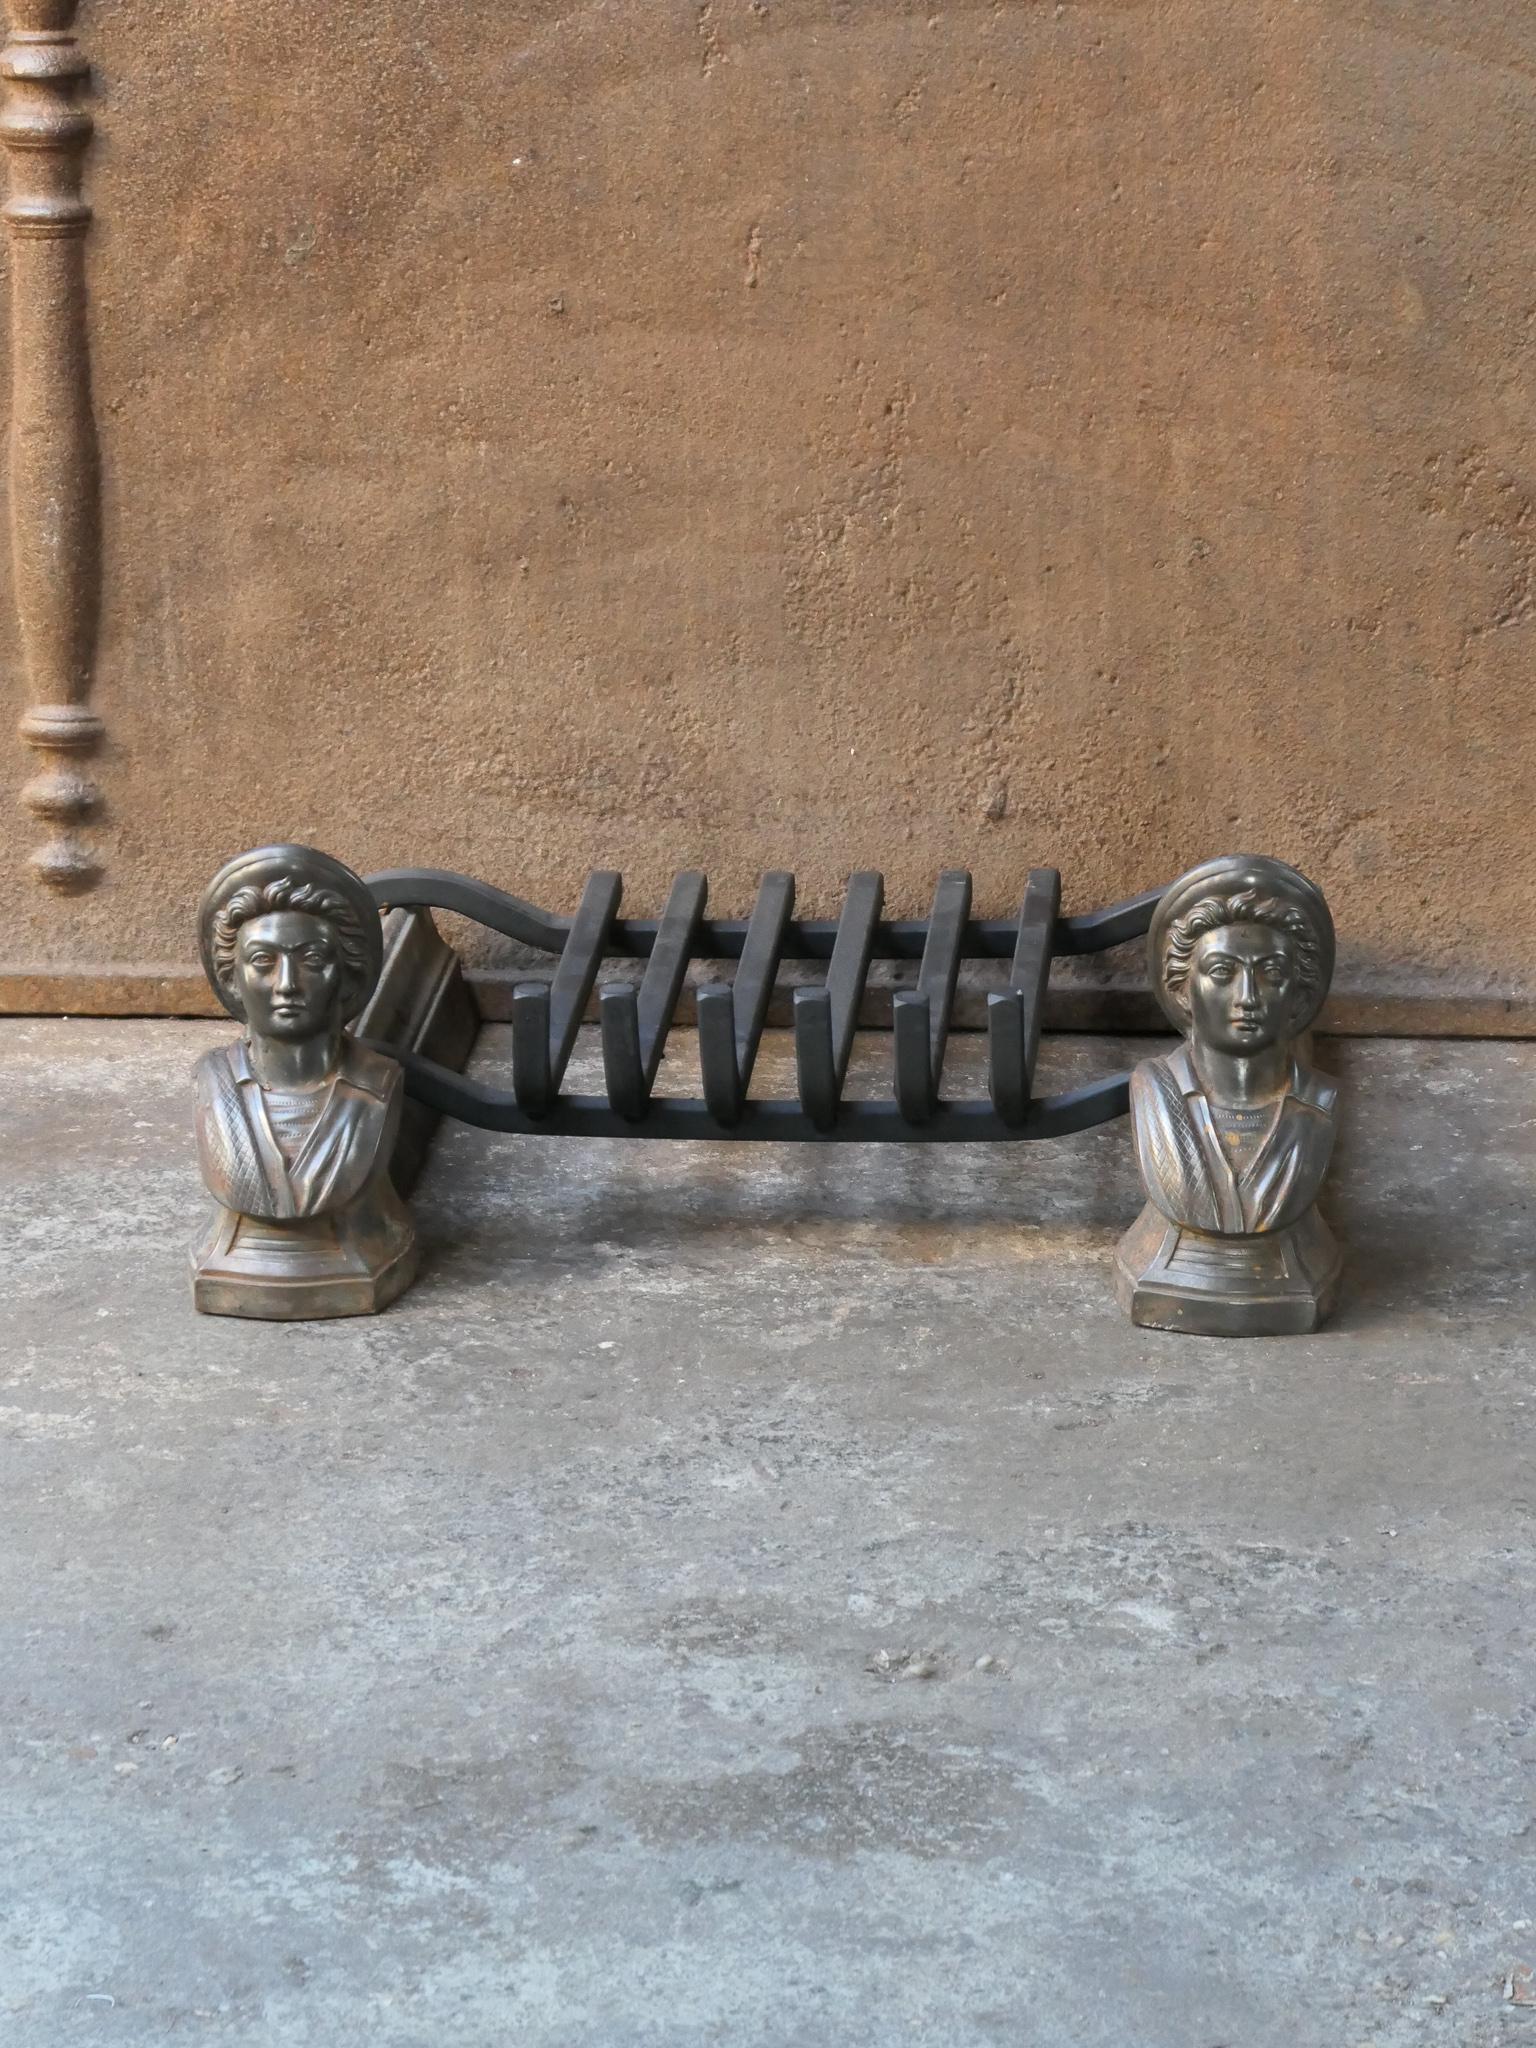 19th Century French Napoleon III period fireplace basket with period andirons and new grate. The fire basket is made of cast iron and wrought iron. The basket is in a good condition and is fully functional.